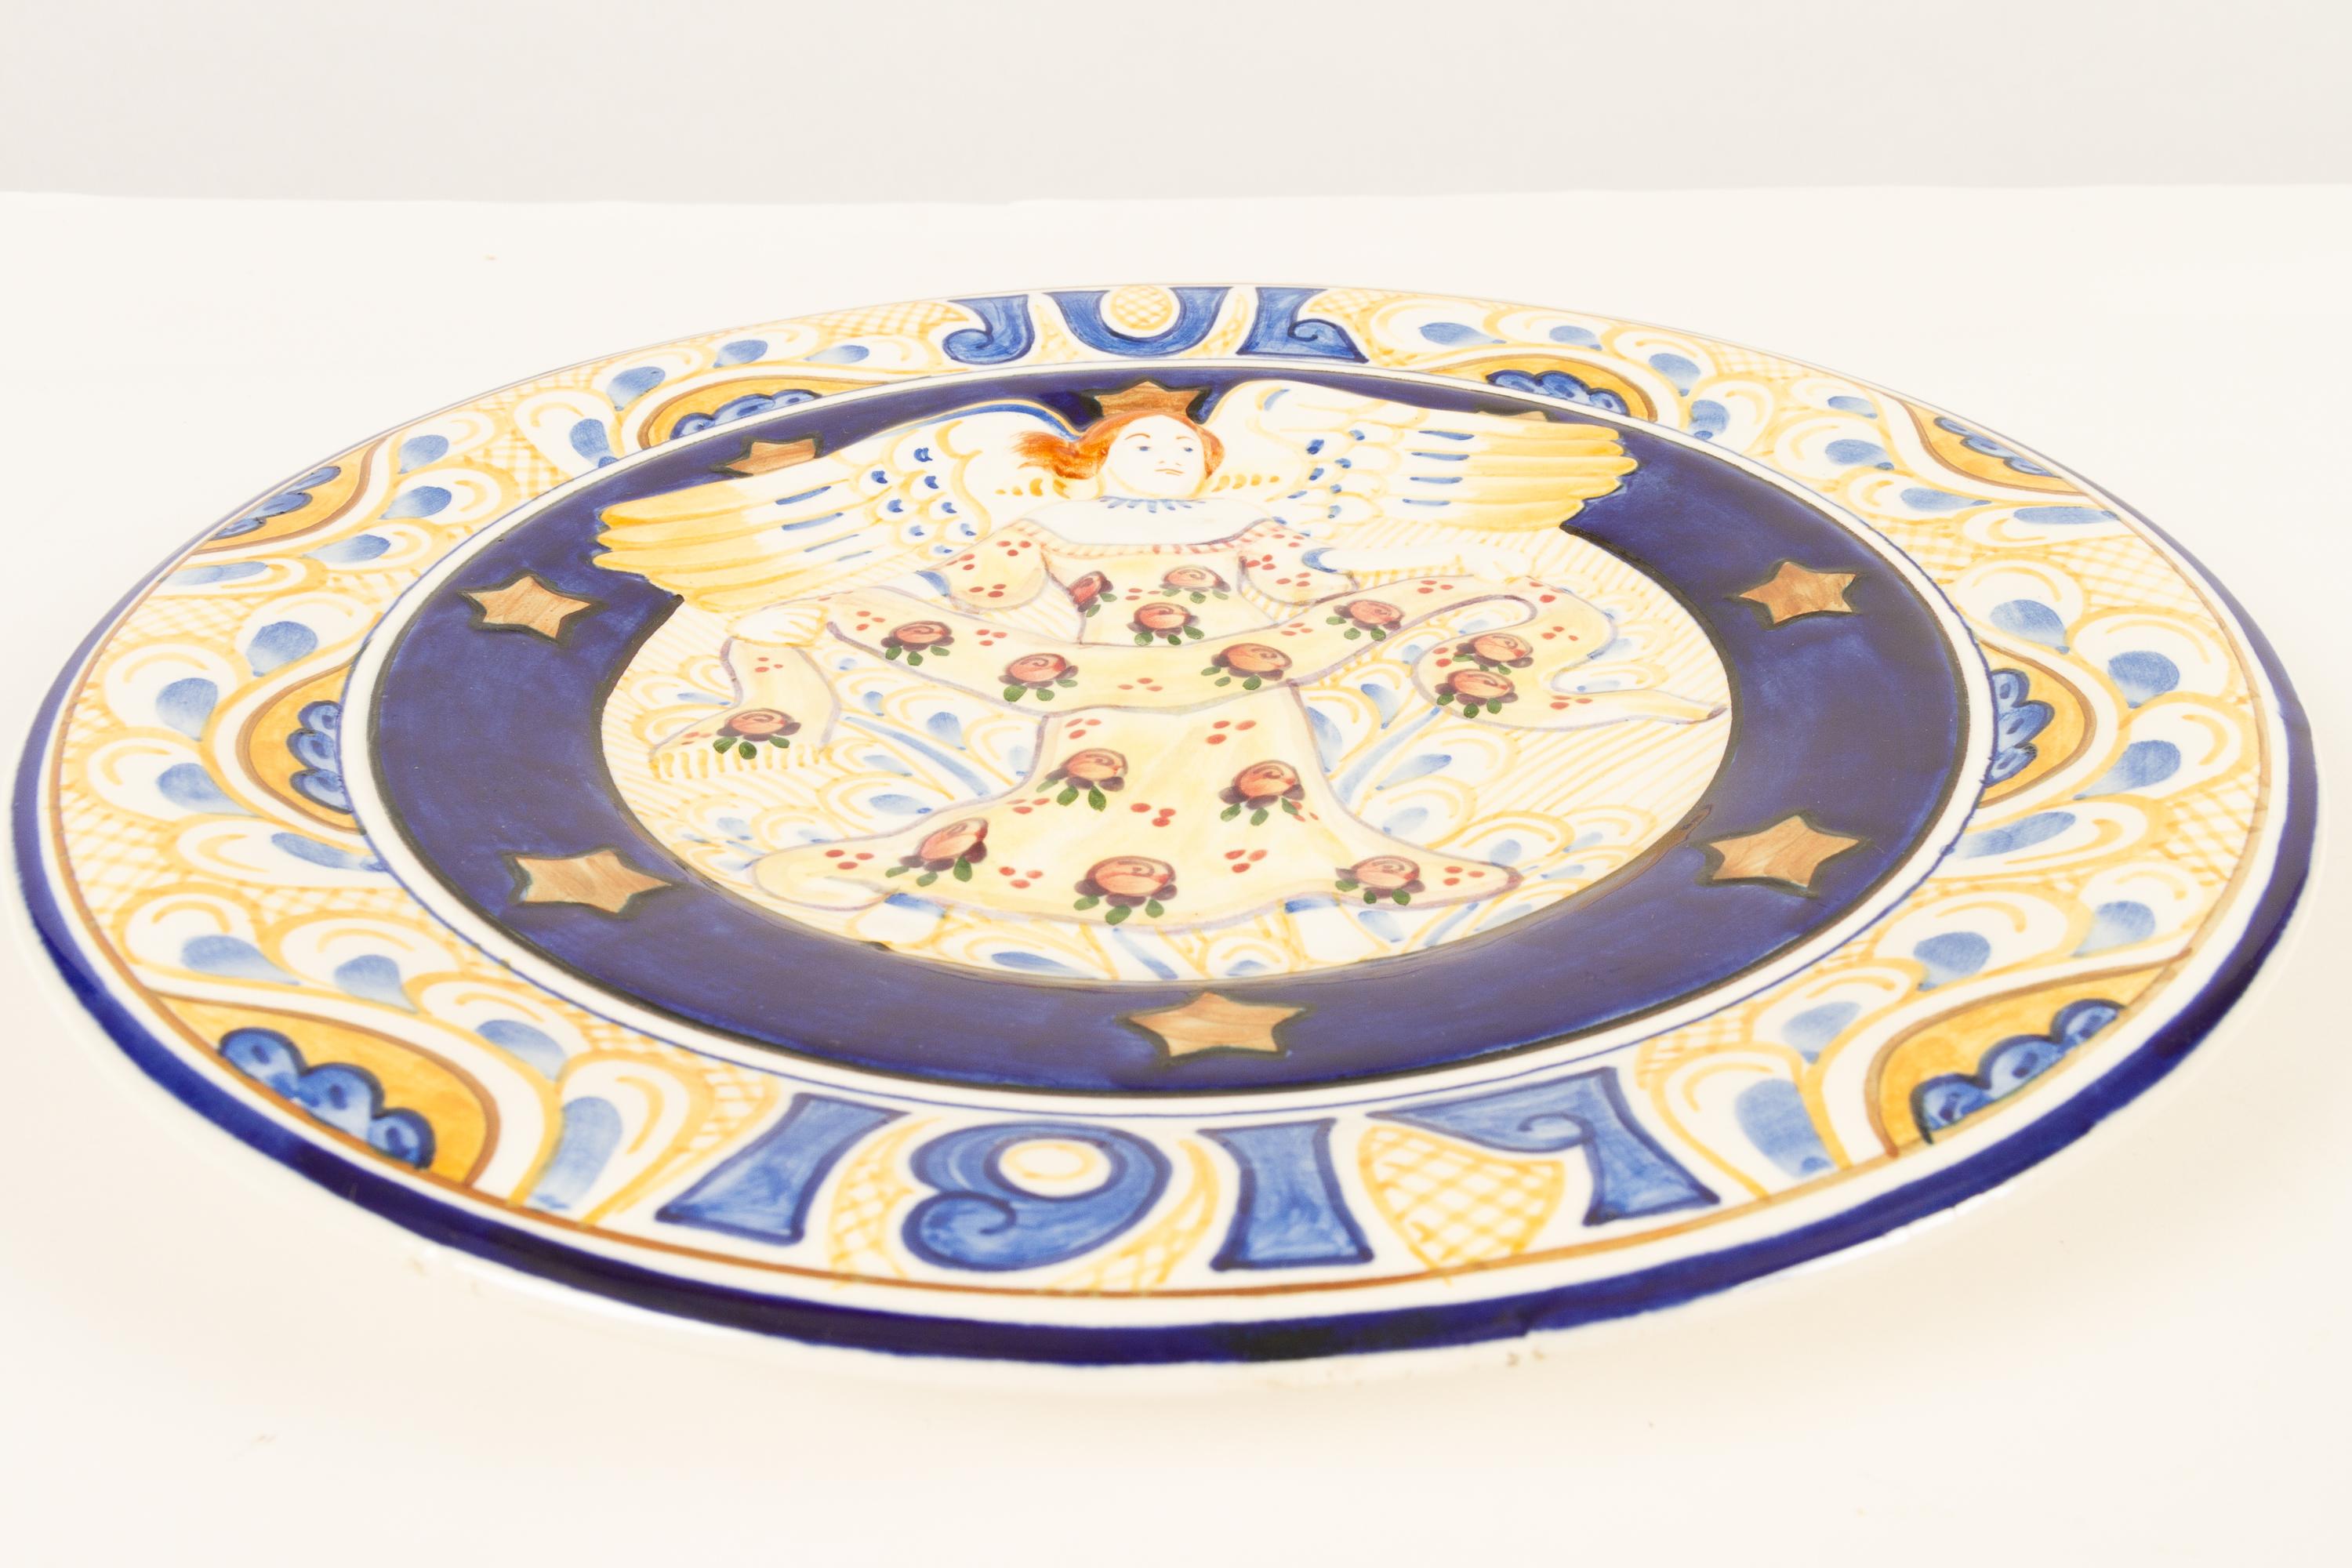 Antique Danish Christmas porcelain decorative plate by Aluminia, 1917.
Large Christmas plate by Aluminia (later Royal Copenhagen) in hand painted faience. The word 